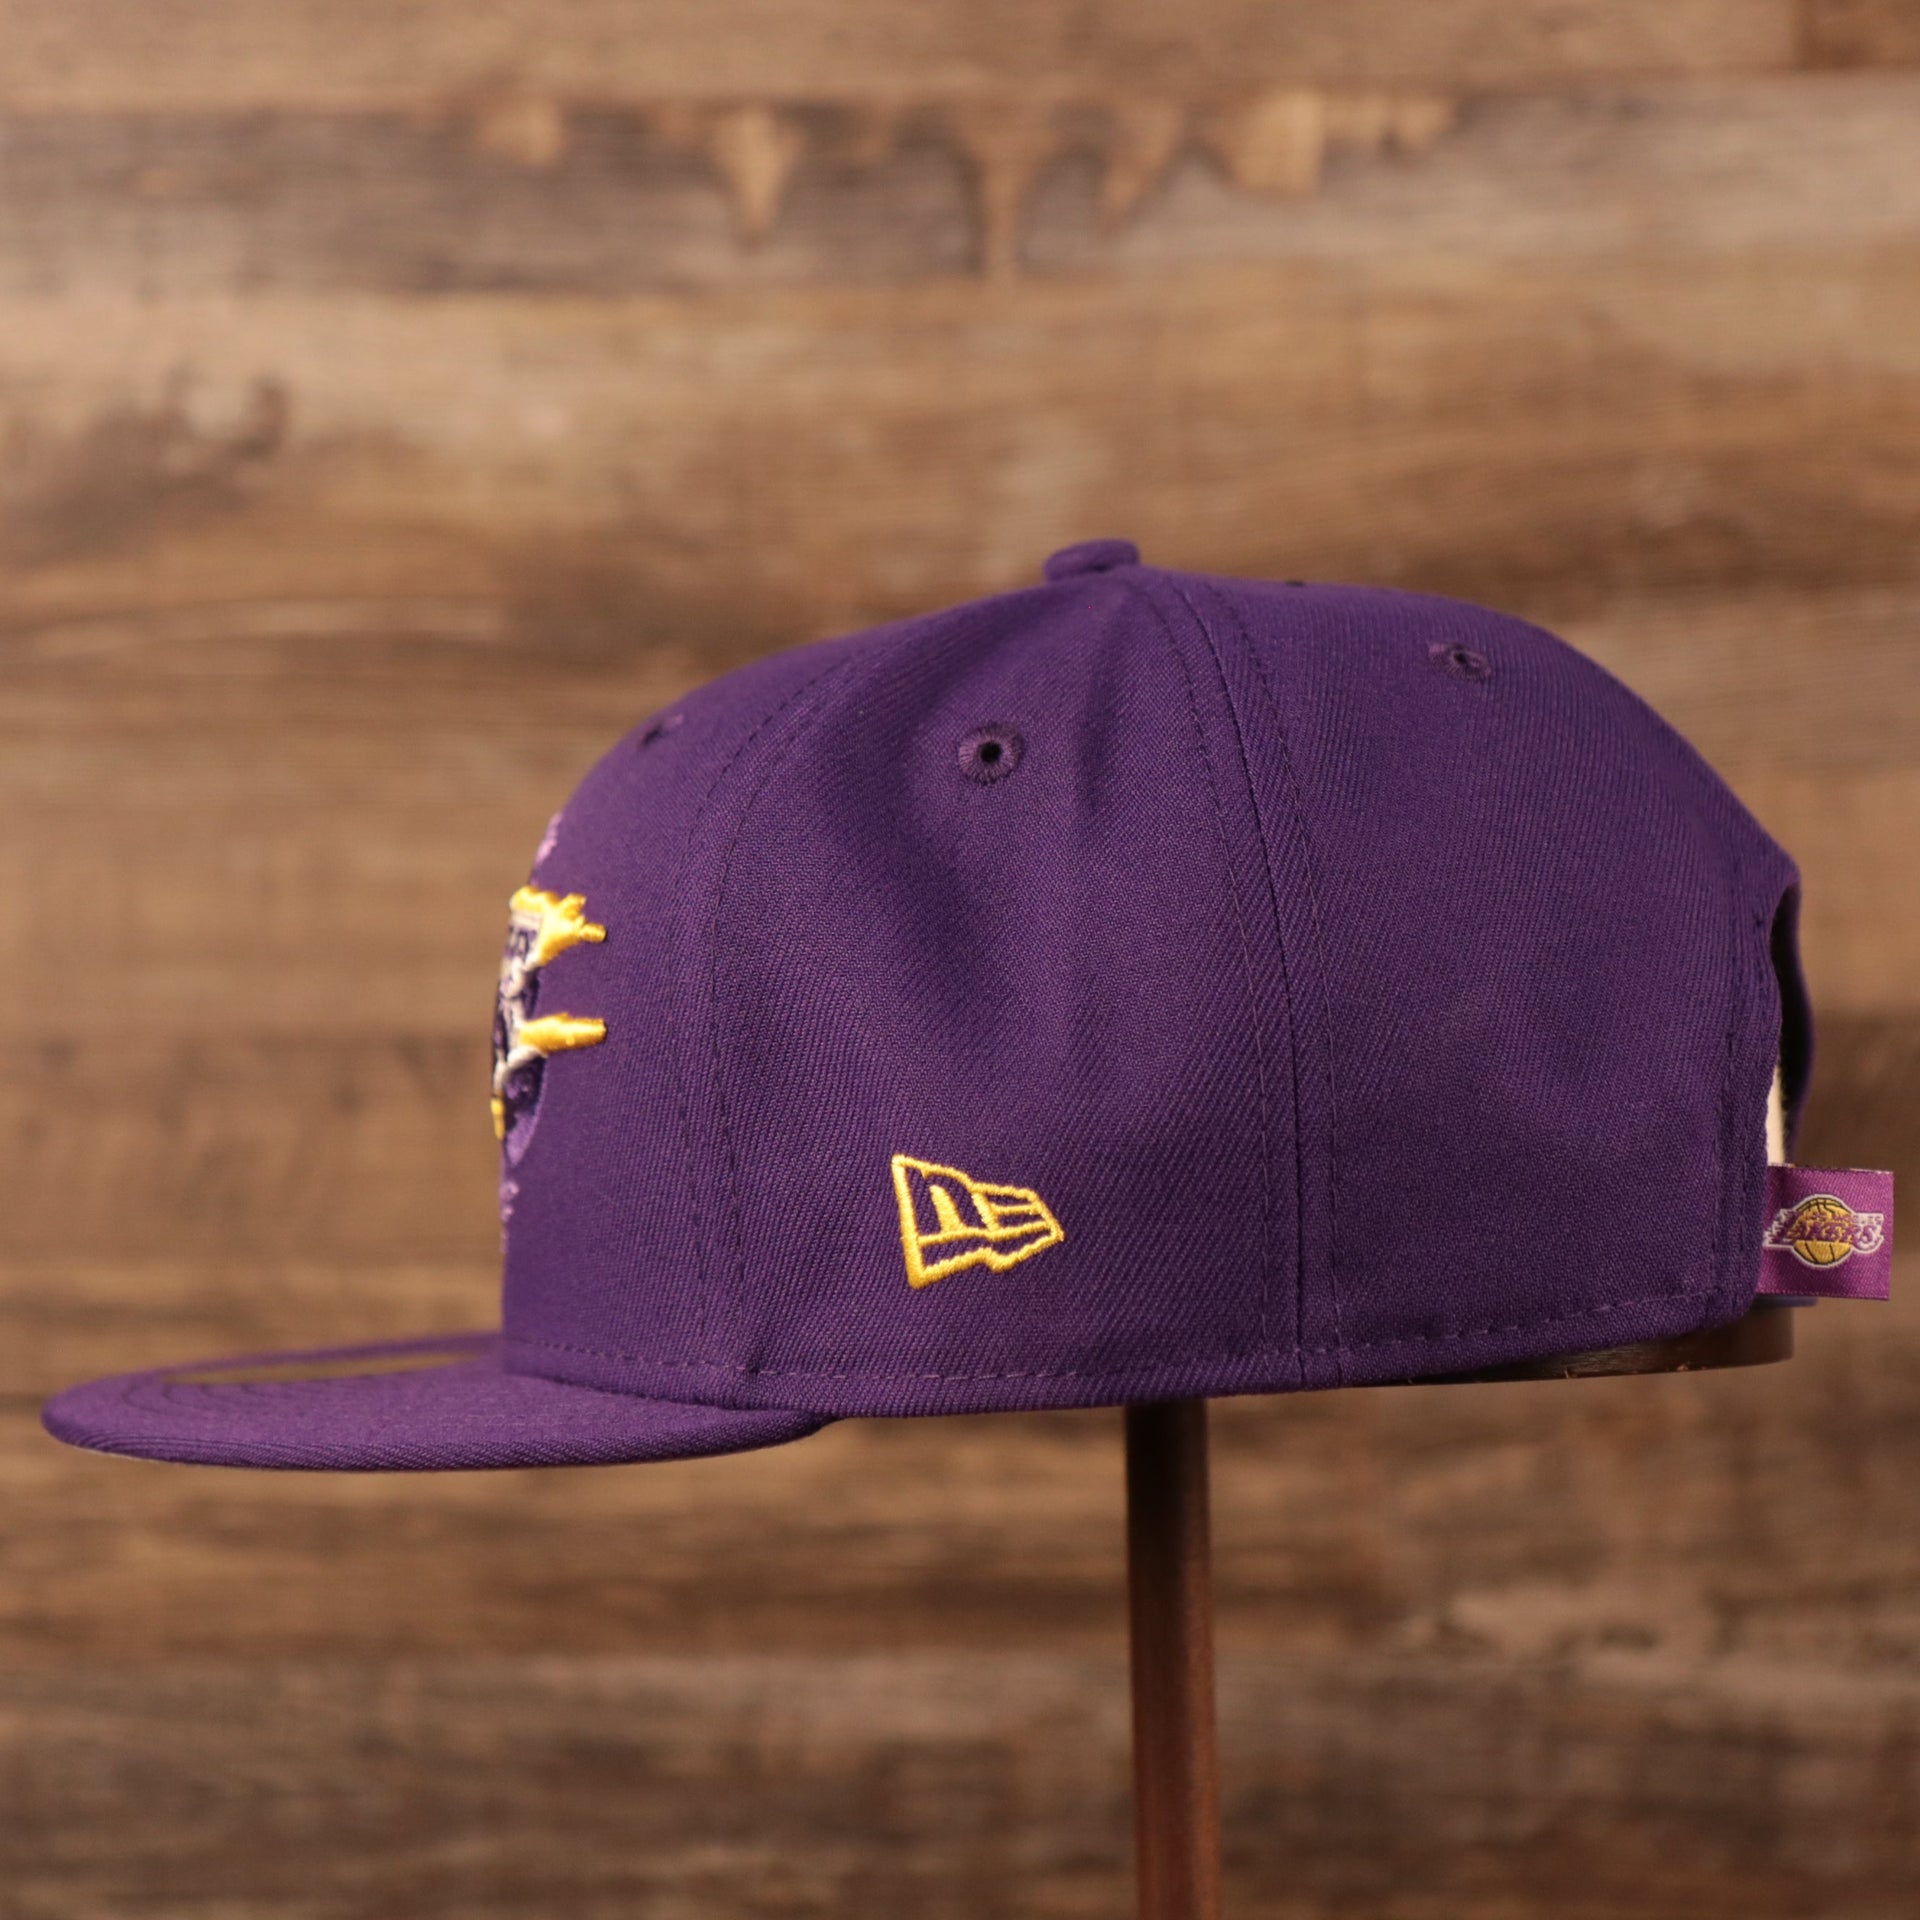 The yellow New Era logo on the left side of the purple Los Angeles Lakers logo tear 9fifty snapback hat.